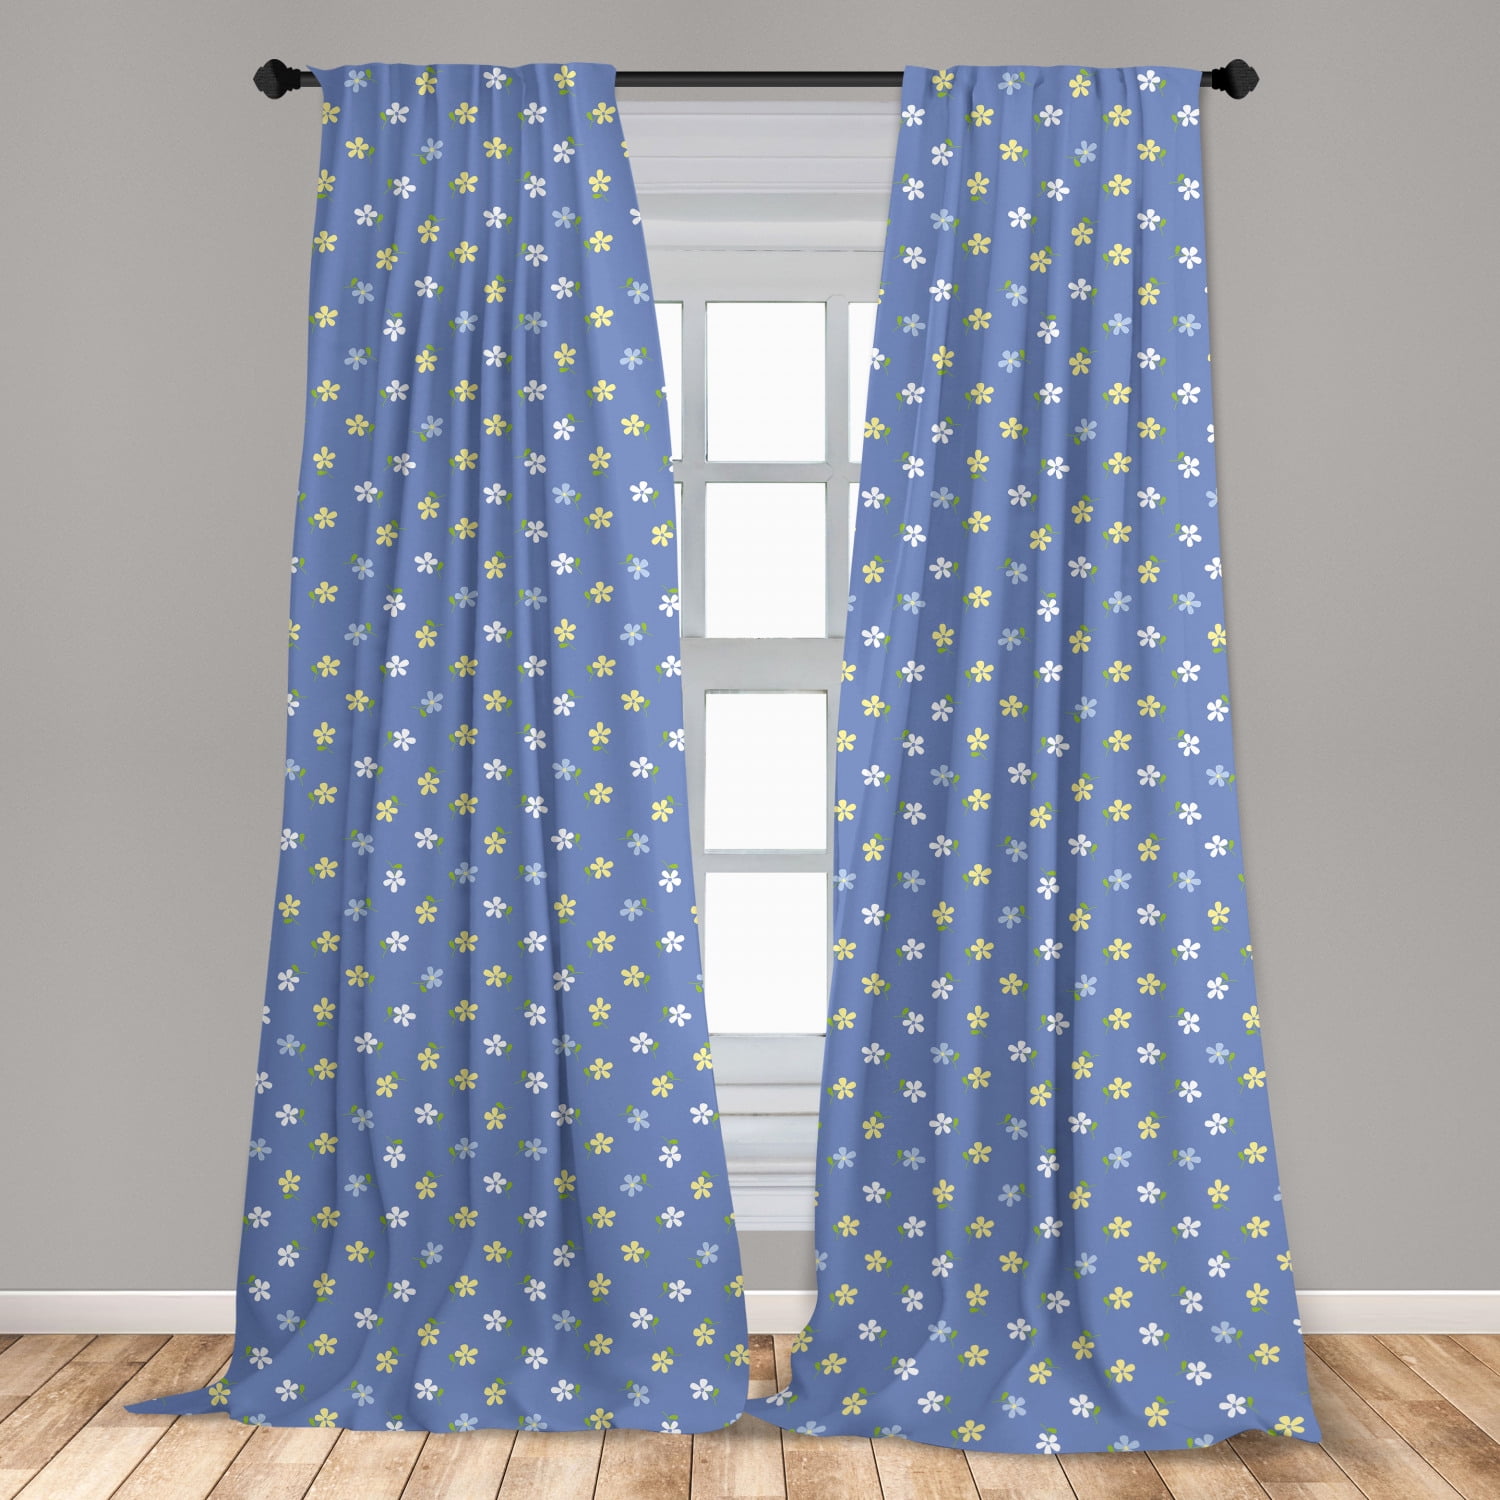 TRUCK CURTAINS VOLVO Blue Full set of lined curtains PomPom trim